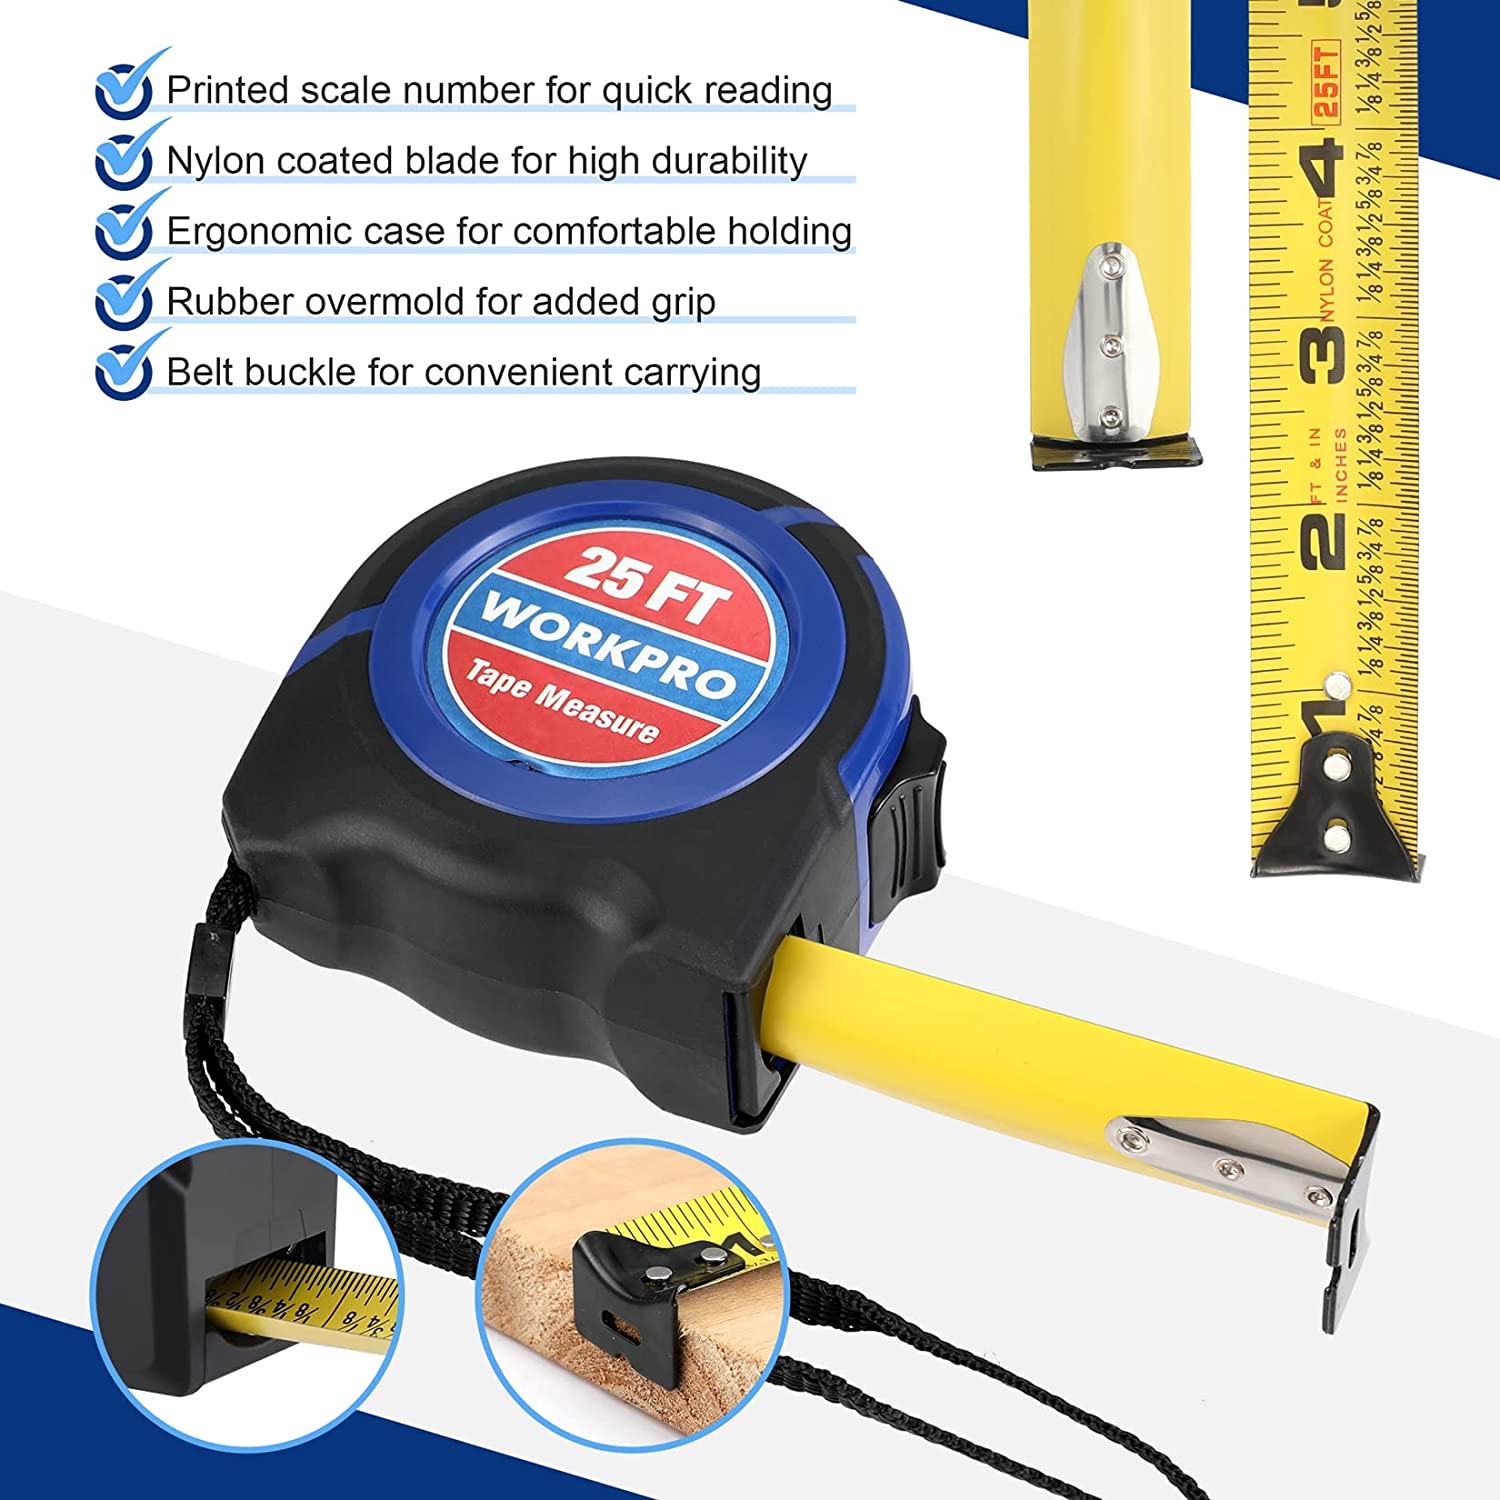 WORKPRO Tape Measure 25 FT, Tape Measure with Fractions Every 1/8